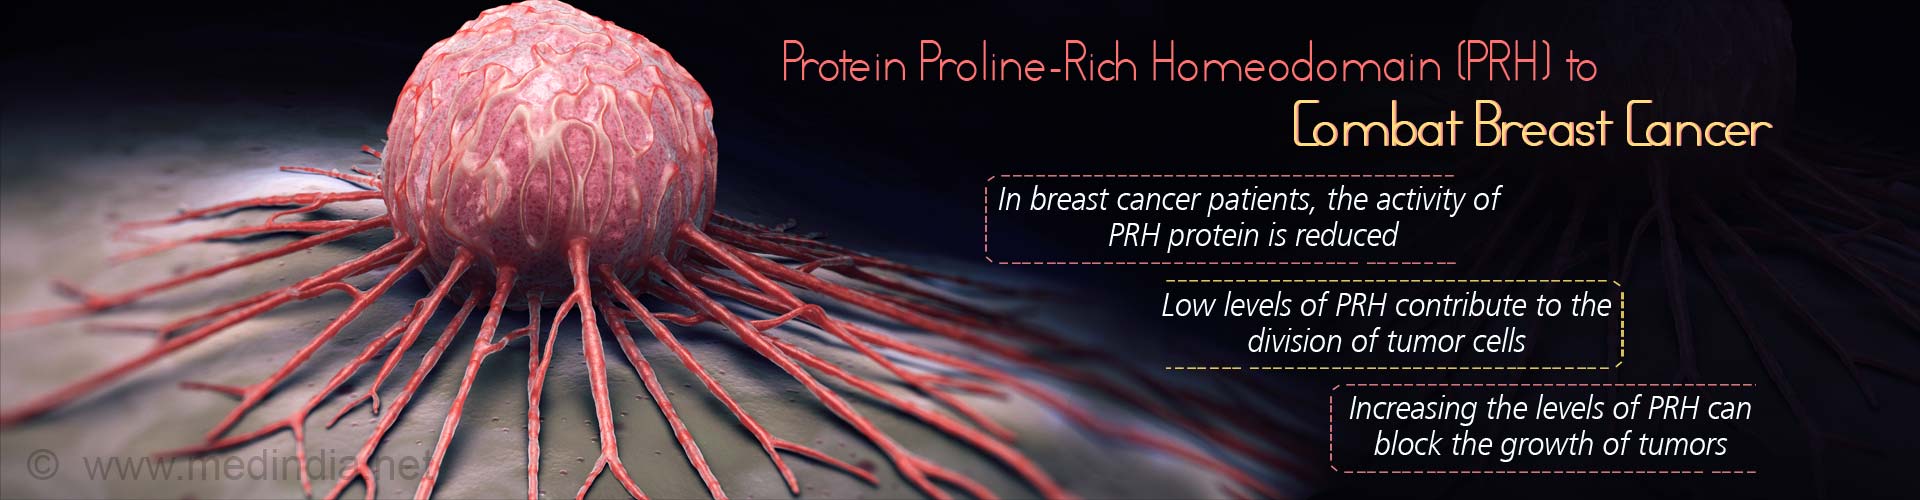 Protein proline-rich homeodomain (PRH) to combat breast cancer
- In breast cancer patients, the activity of PRH protein is reduced
- Low levels of PRH contribute to the division of tumor cells
- Increase the levels of PRH can block the growth of tumors